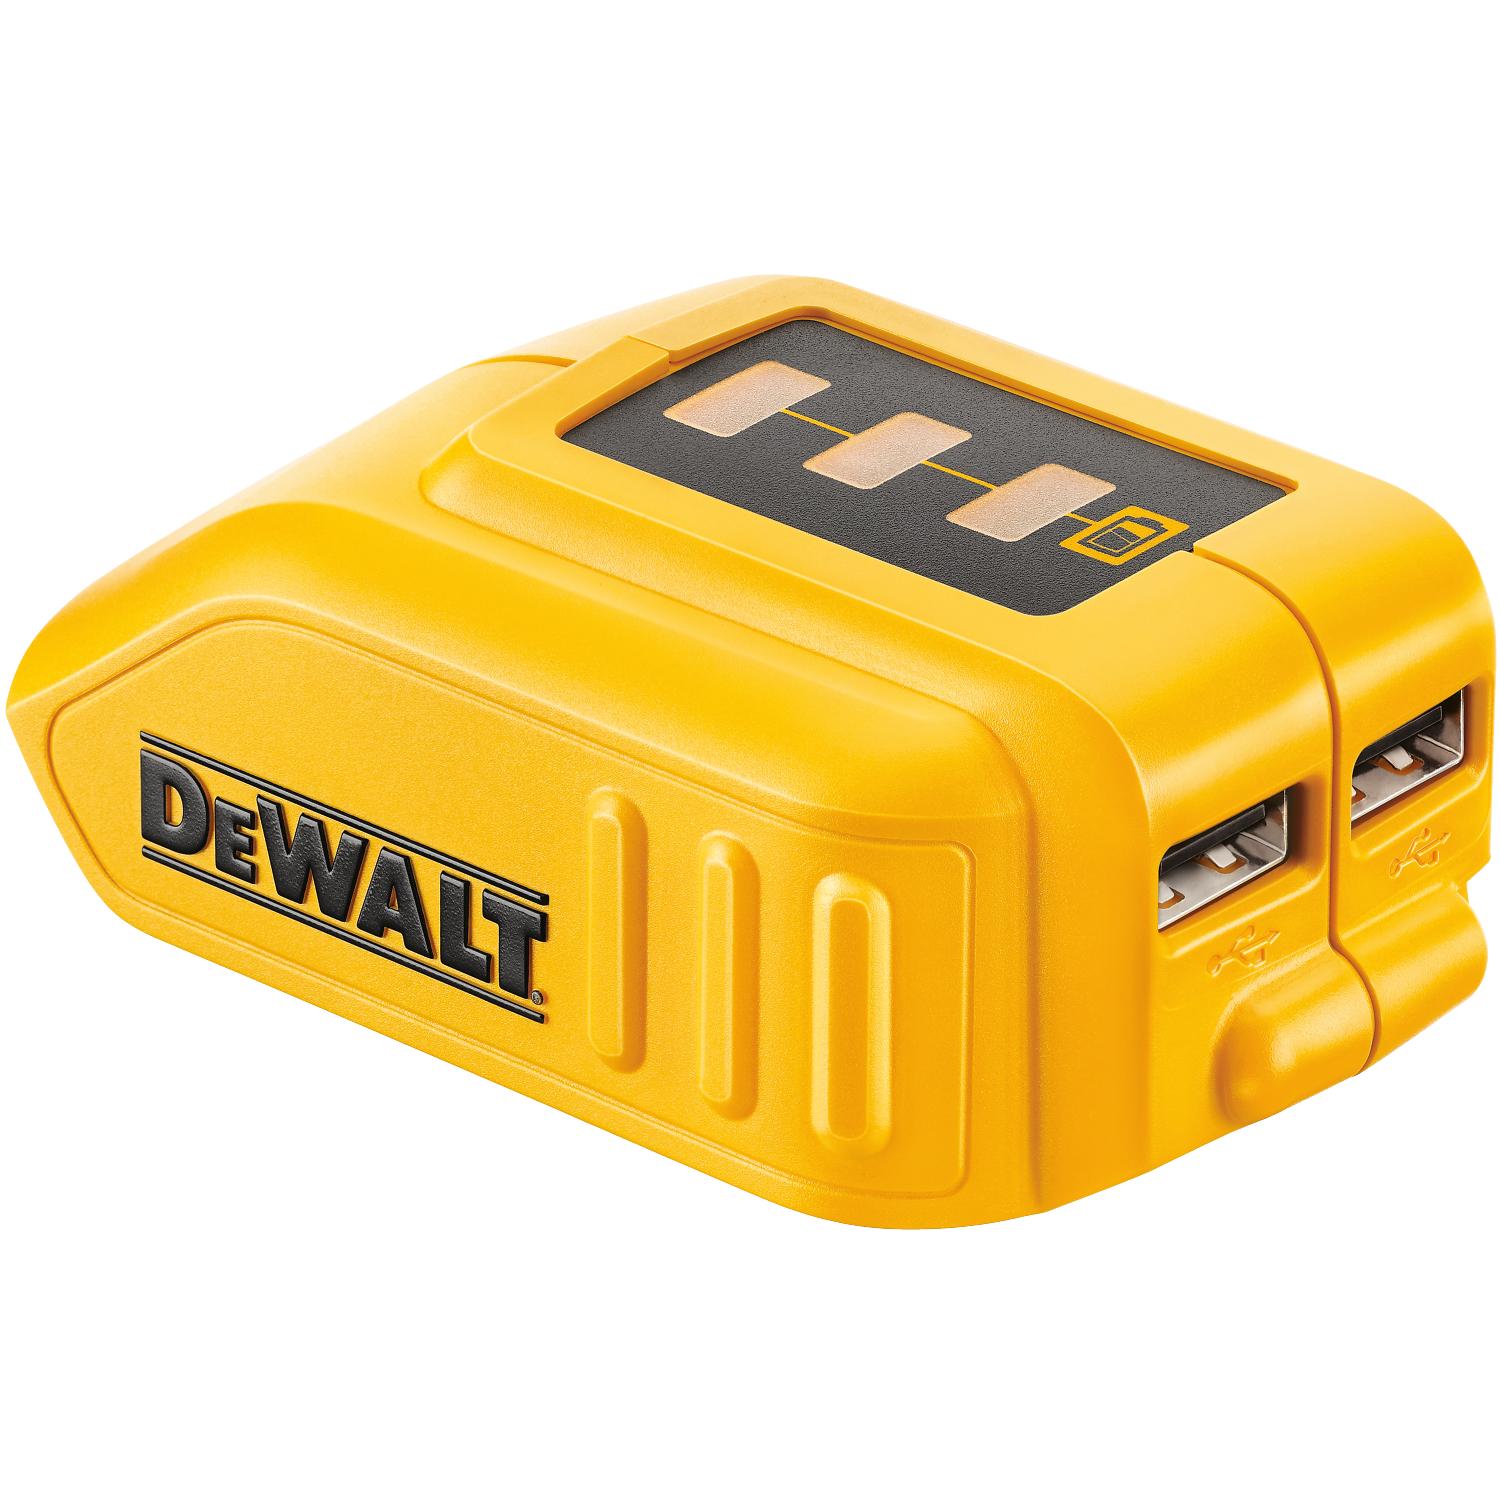 battery adapter snap on to dewalt